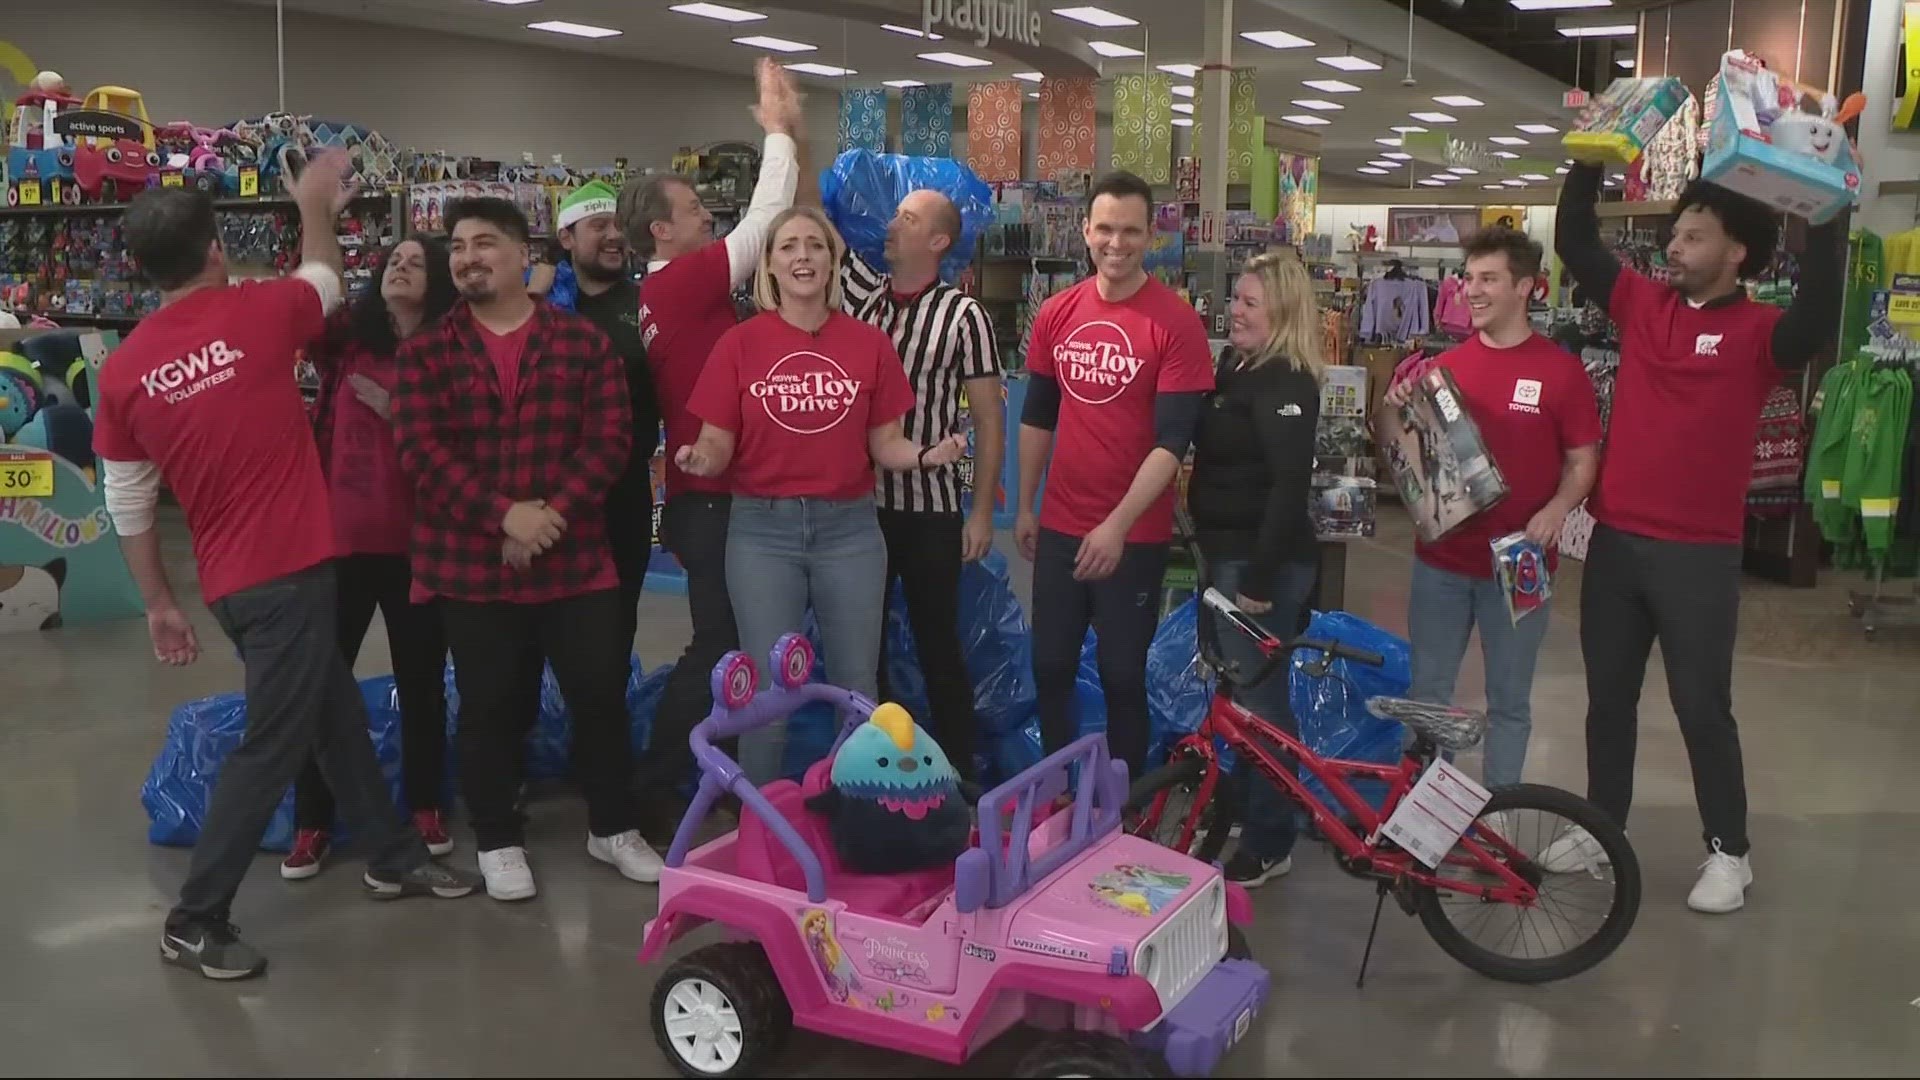 The KGW Great Toy Drive is an annual tradition in its 35th year, that helps collect toys to families in need across the area. The drive goes through Friday, Dec. 15.